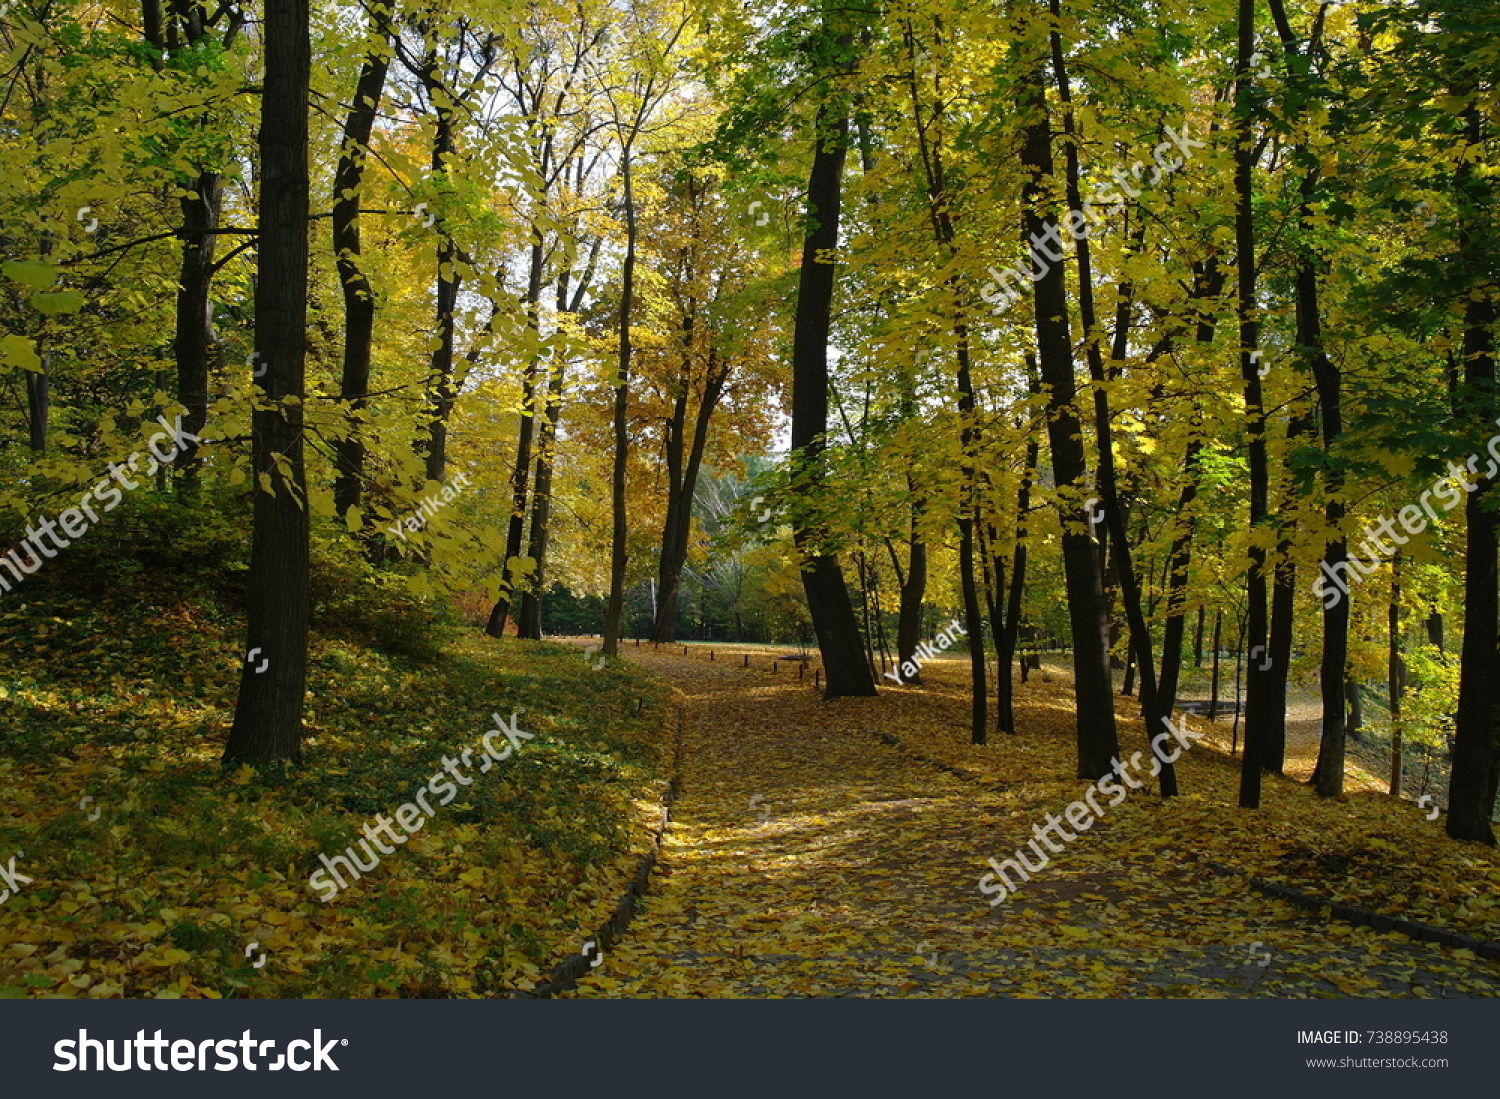 Forest landscape. Road in the park, autumn, trees, yellow leaves. Sunny day. #738895438